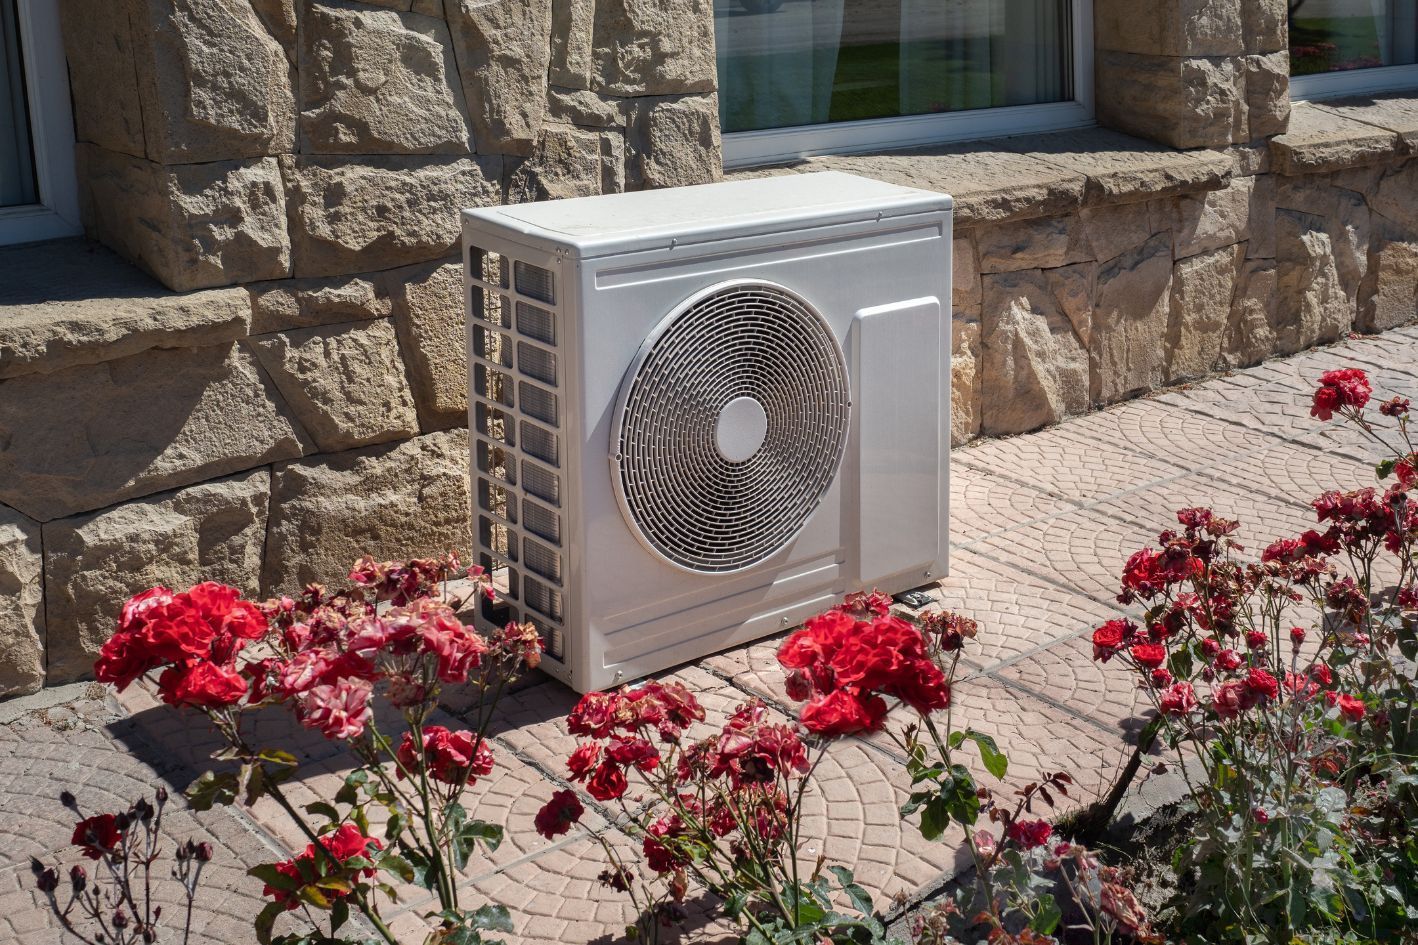 A small heat pump outside a beige stone house with some red flowers in front of it.